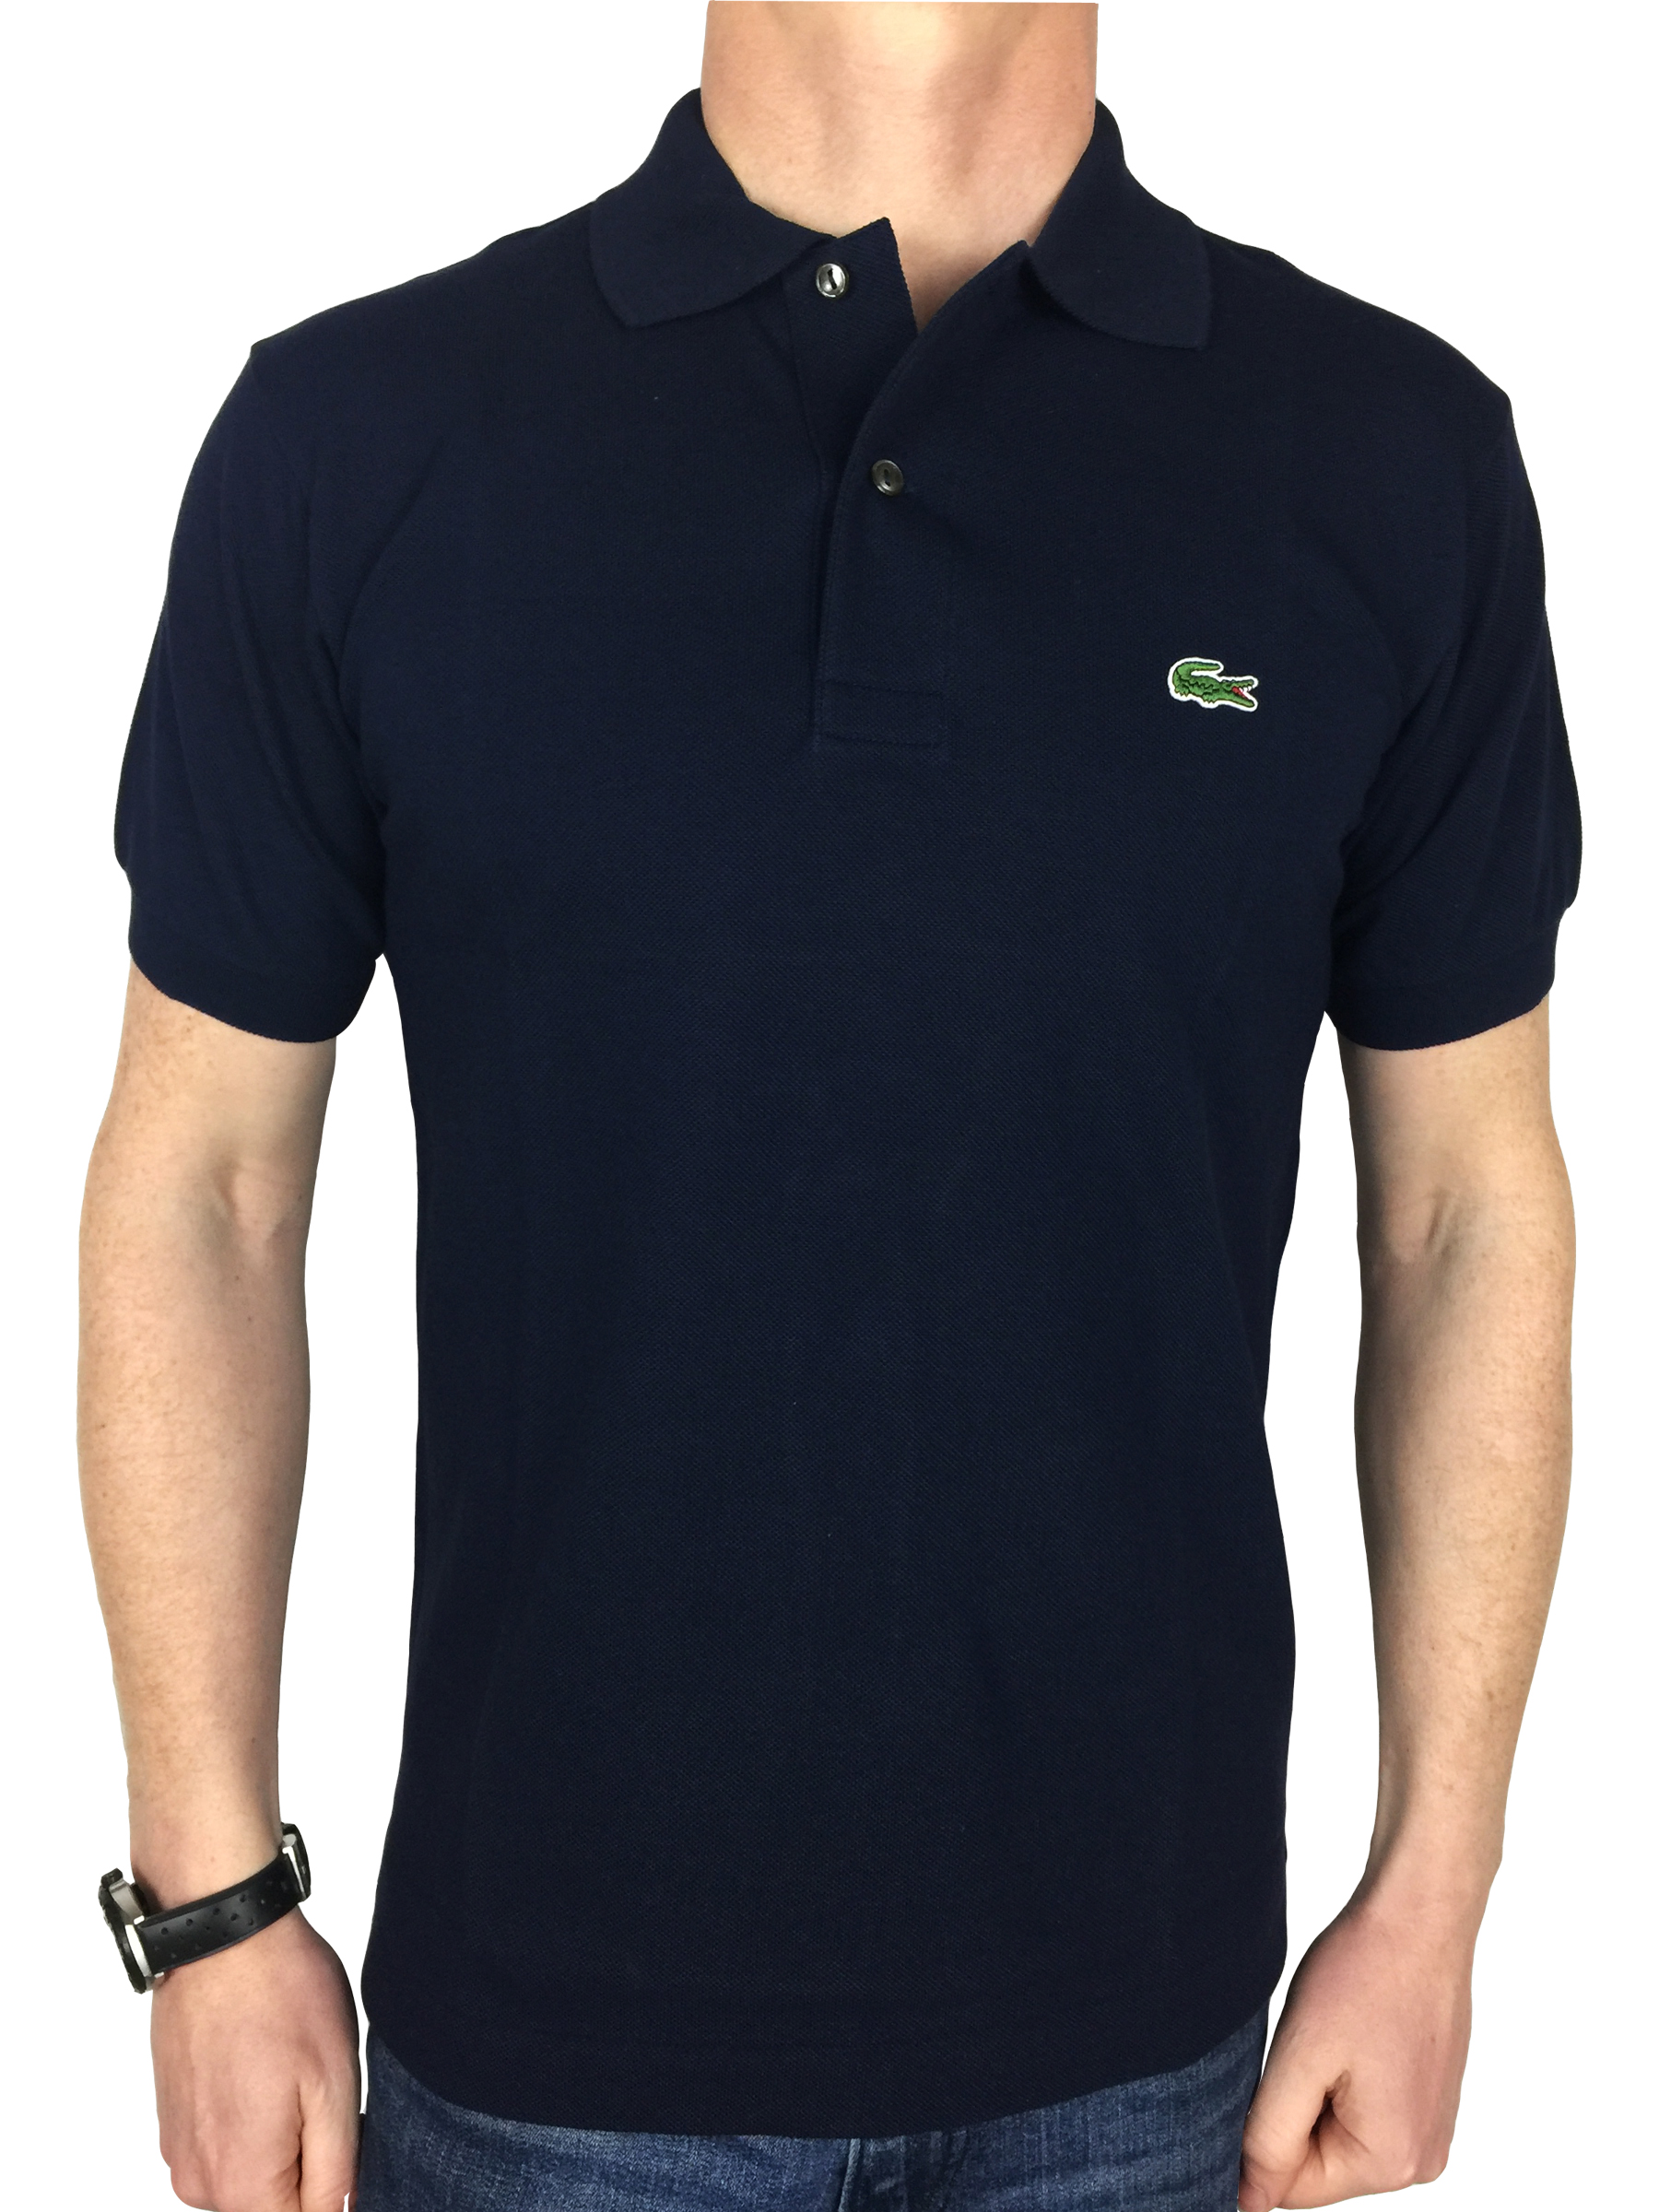 kaping overeenkomst naast Lacoste Mens Classic Cotton L1212 Short Sleeve Polo Shirt 27 off Size 5 - L  Navy Blue for sale online | eBay